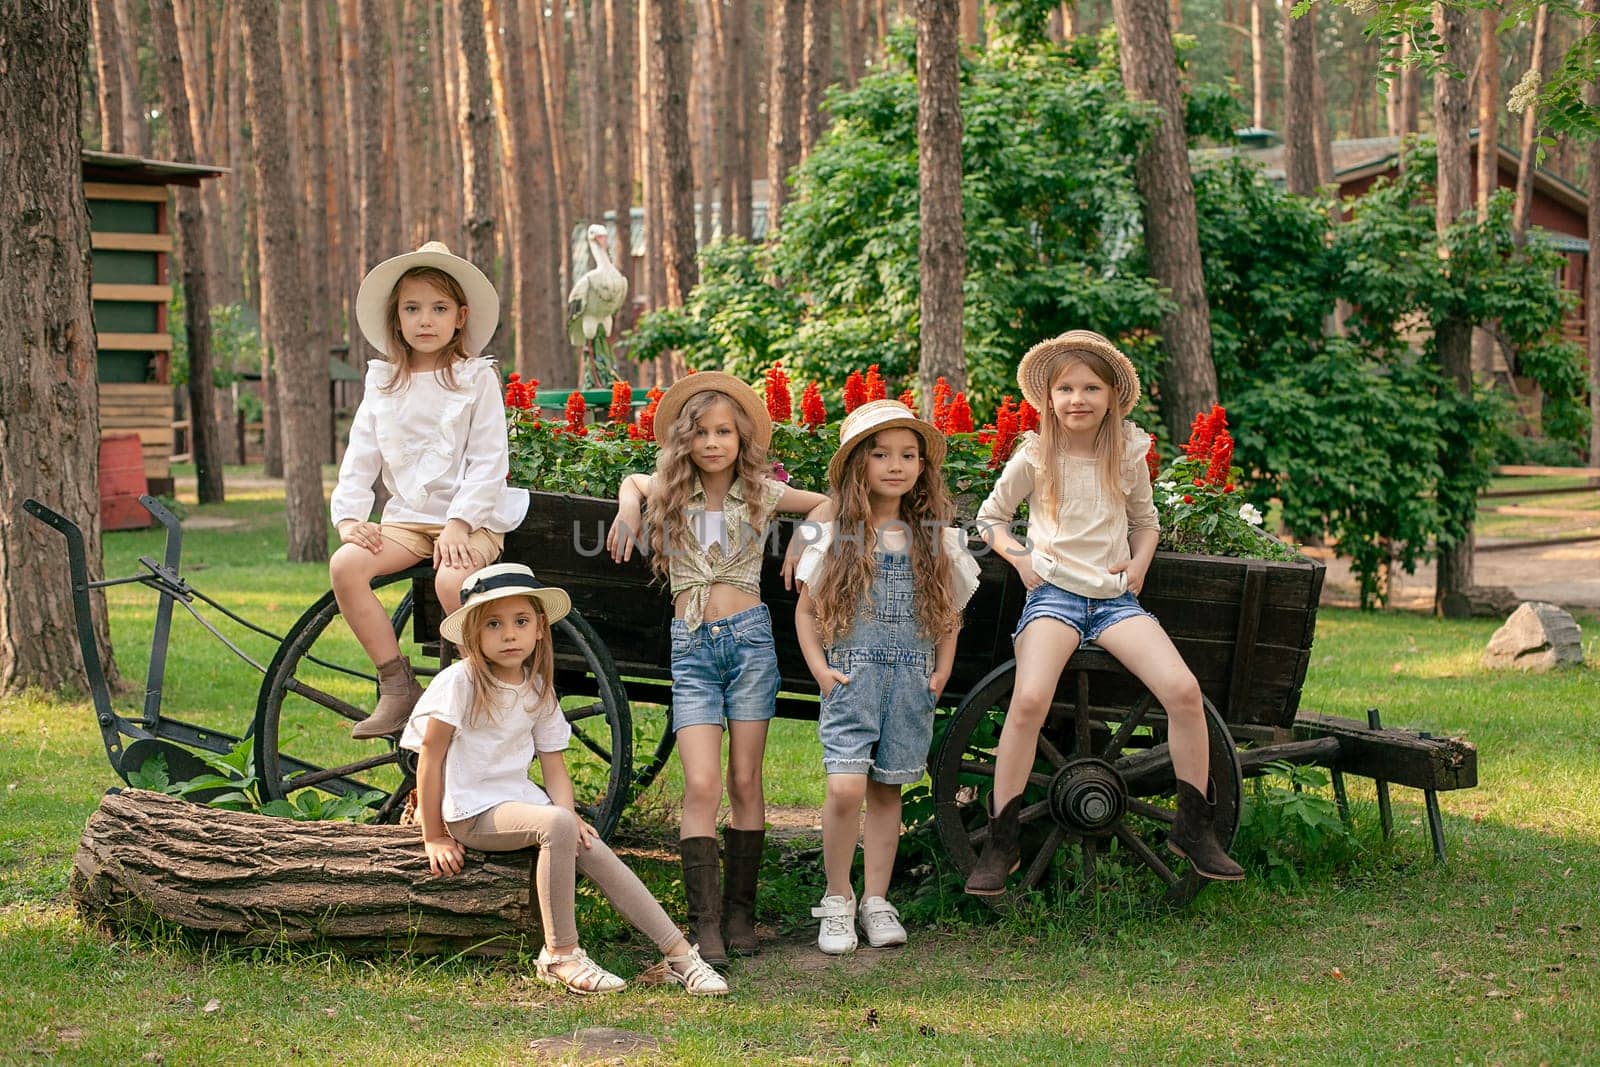 Group of friendly preteen girls posing next to vintage wooden cart designed as flower bed outdoors by nazarovsergey